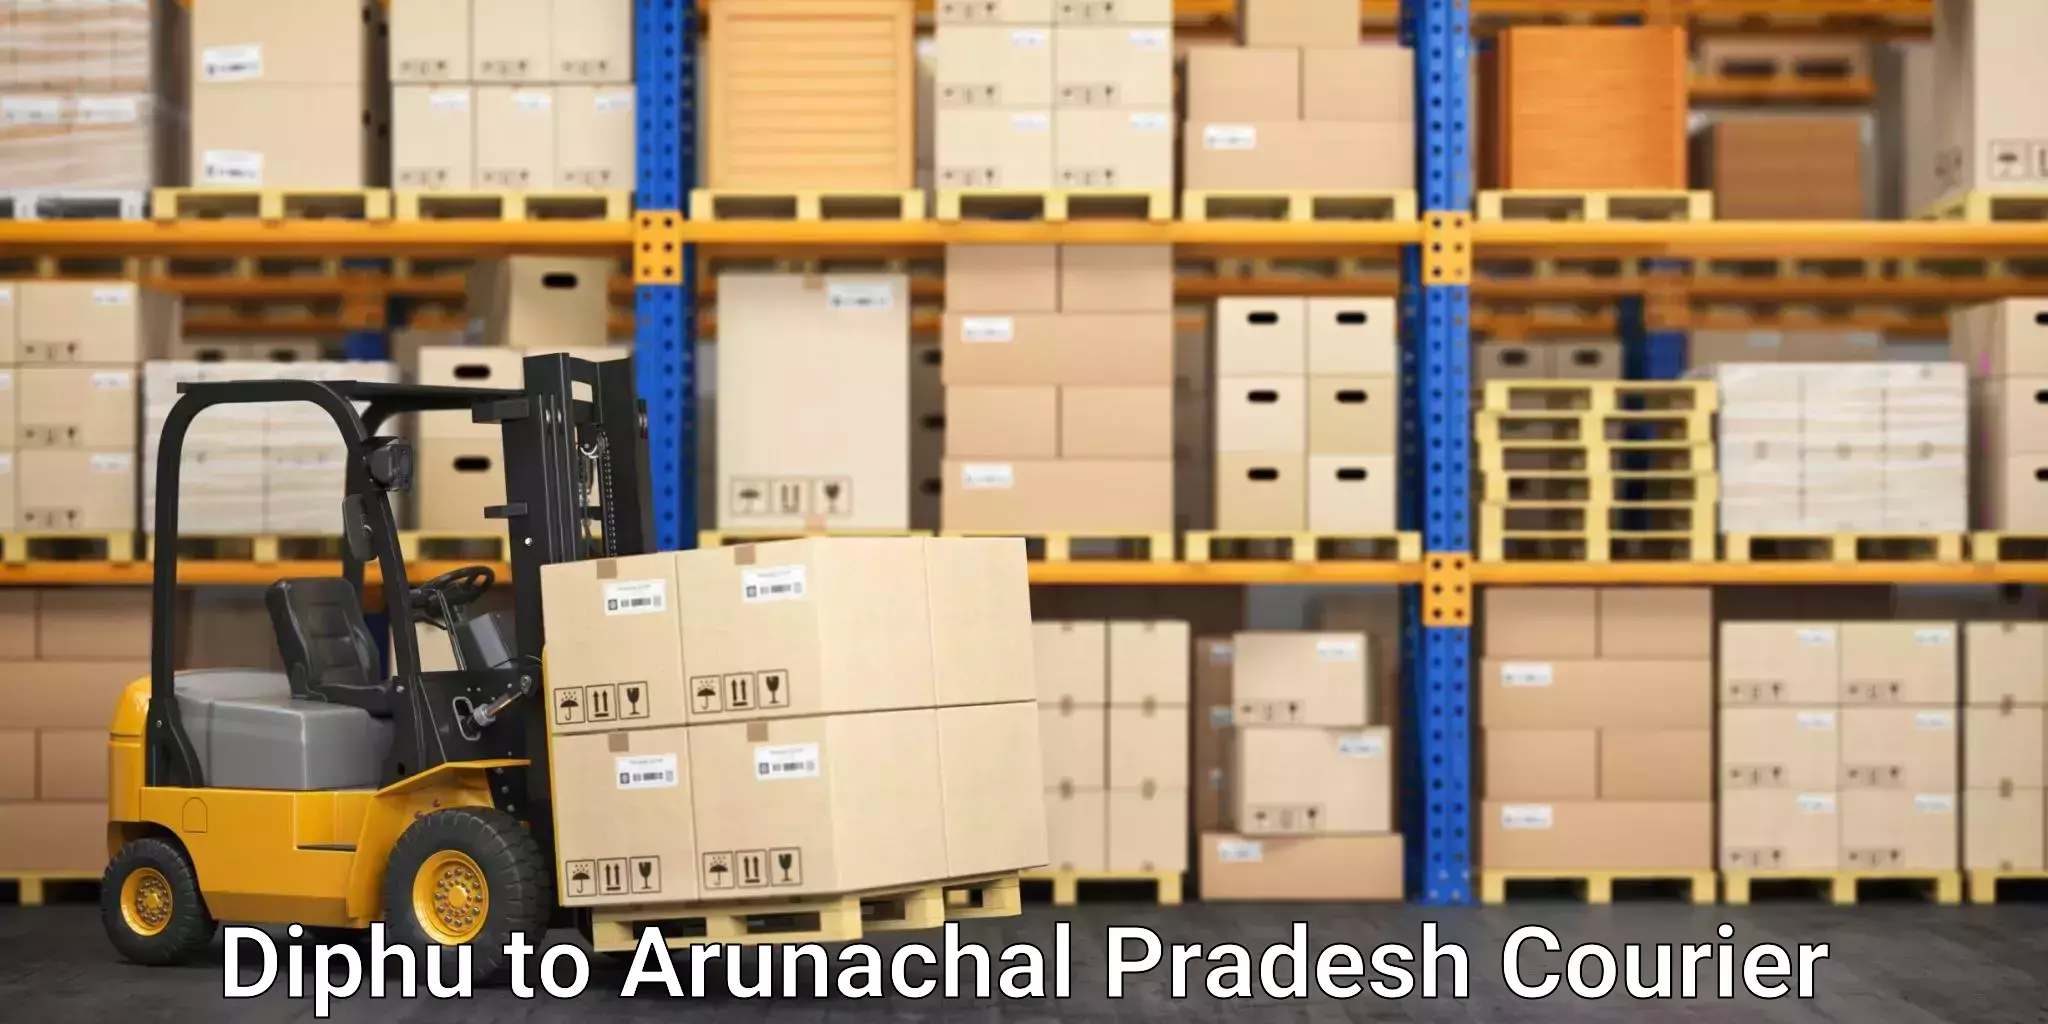 Customized delivery solutions Diphu to Arunachal Pradesh